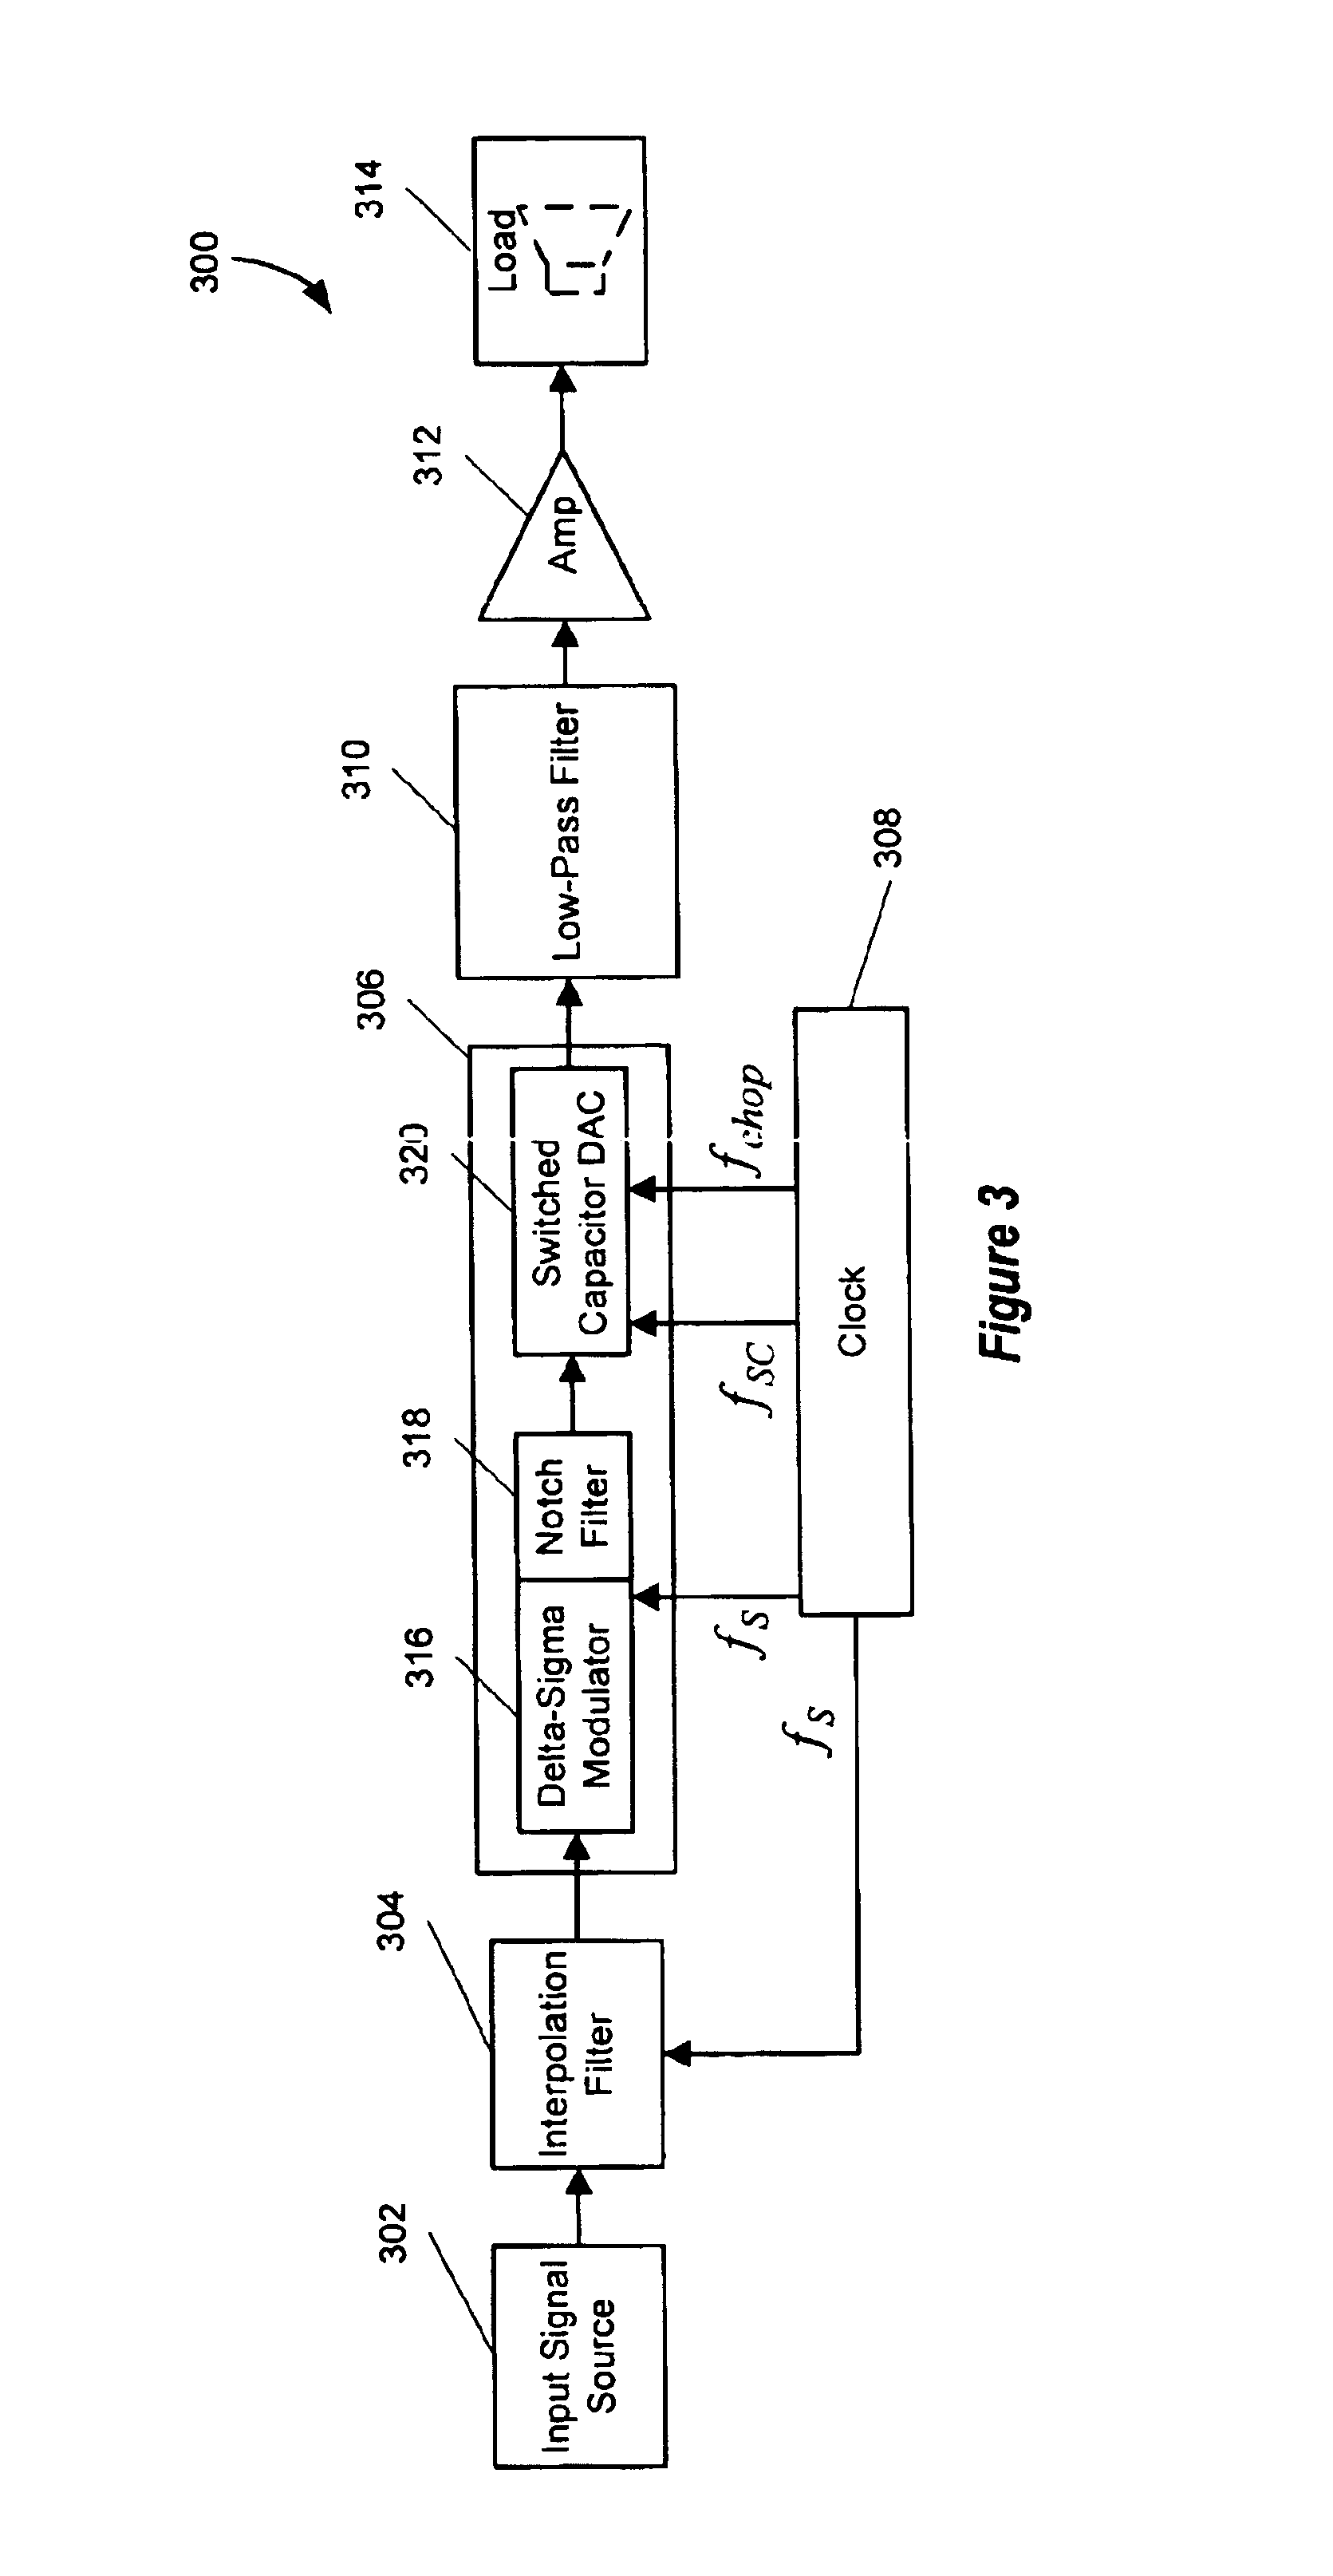 Signal processing system with baseband noise modulation and noise filtering